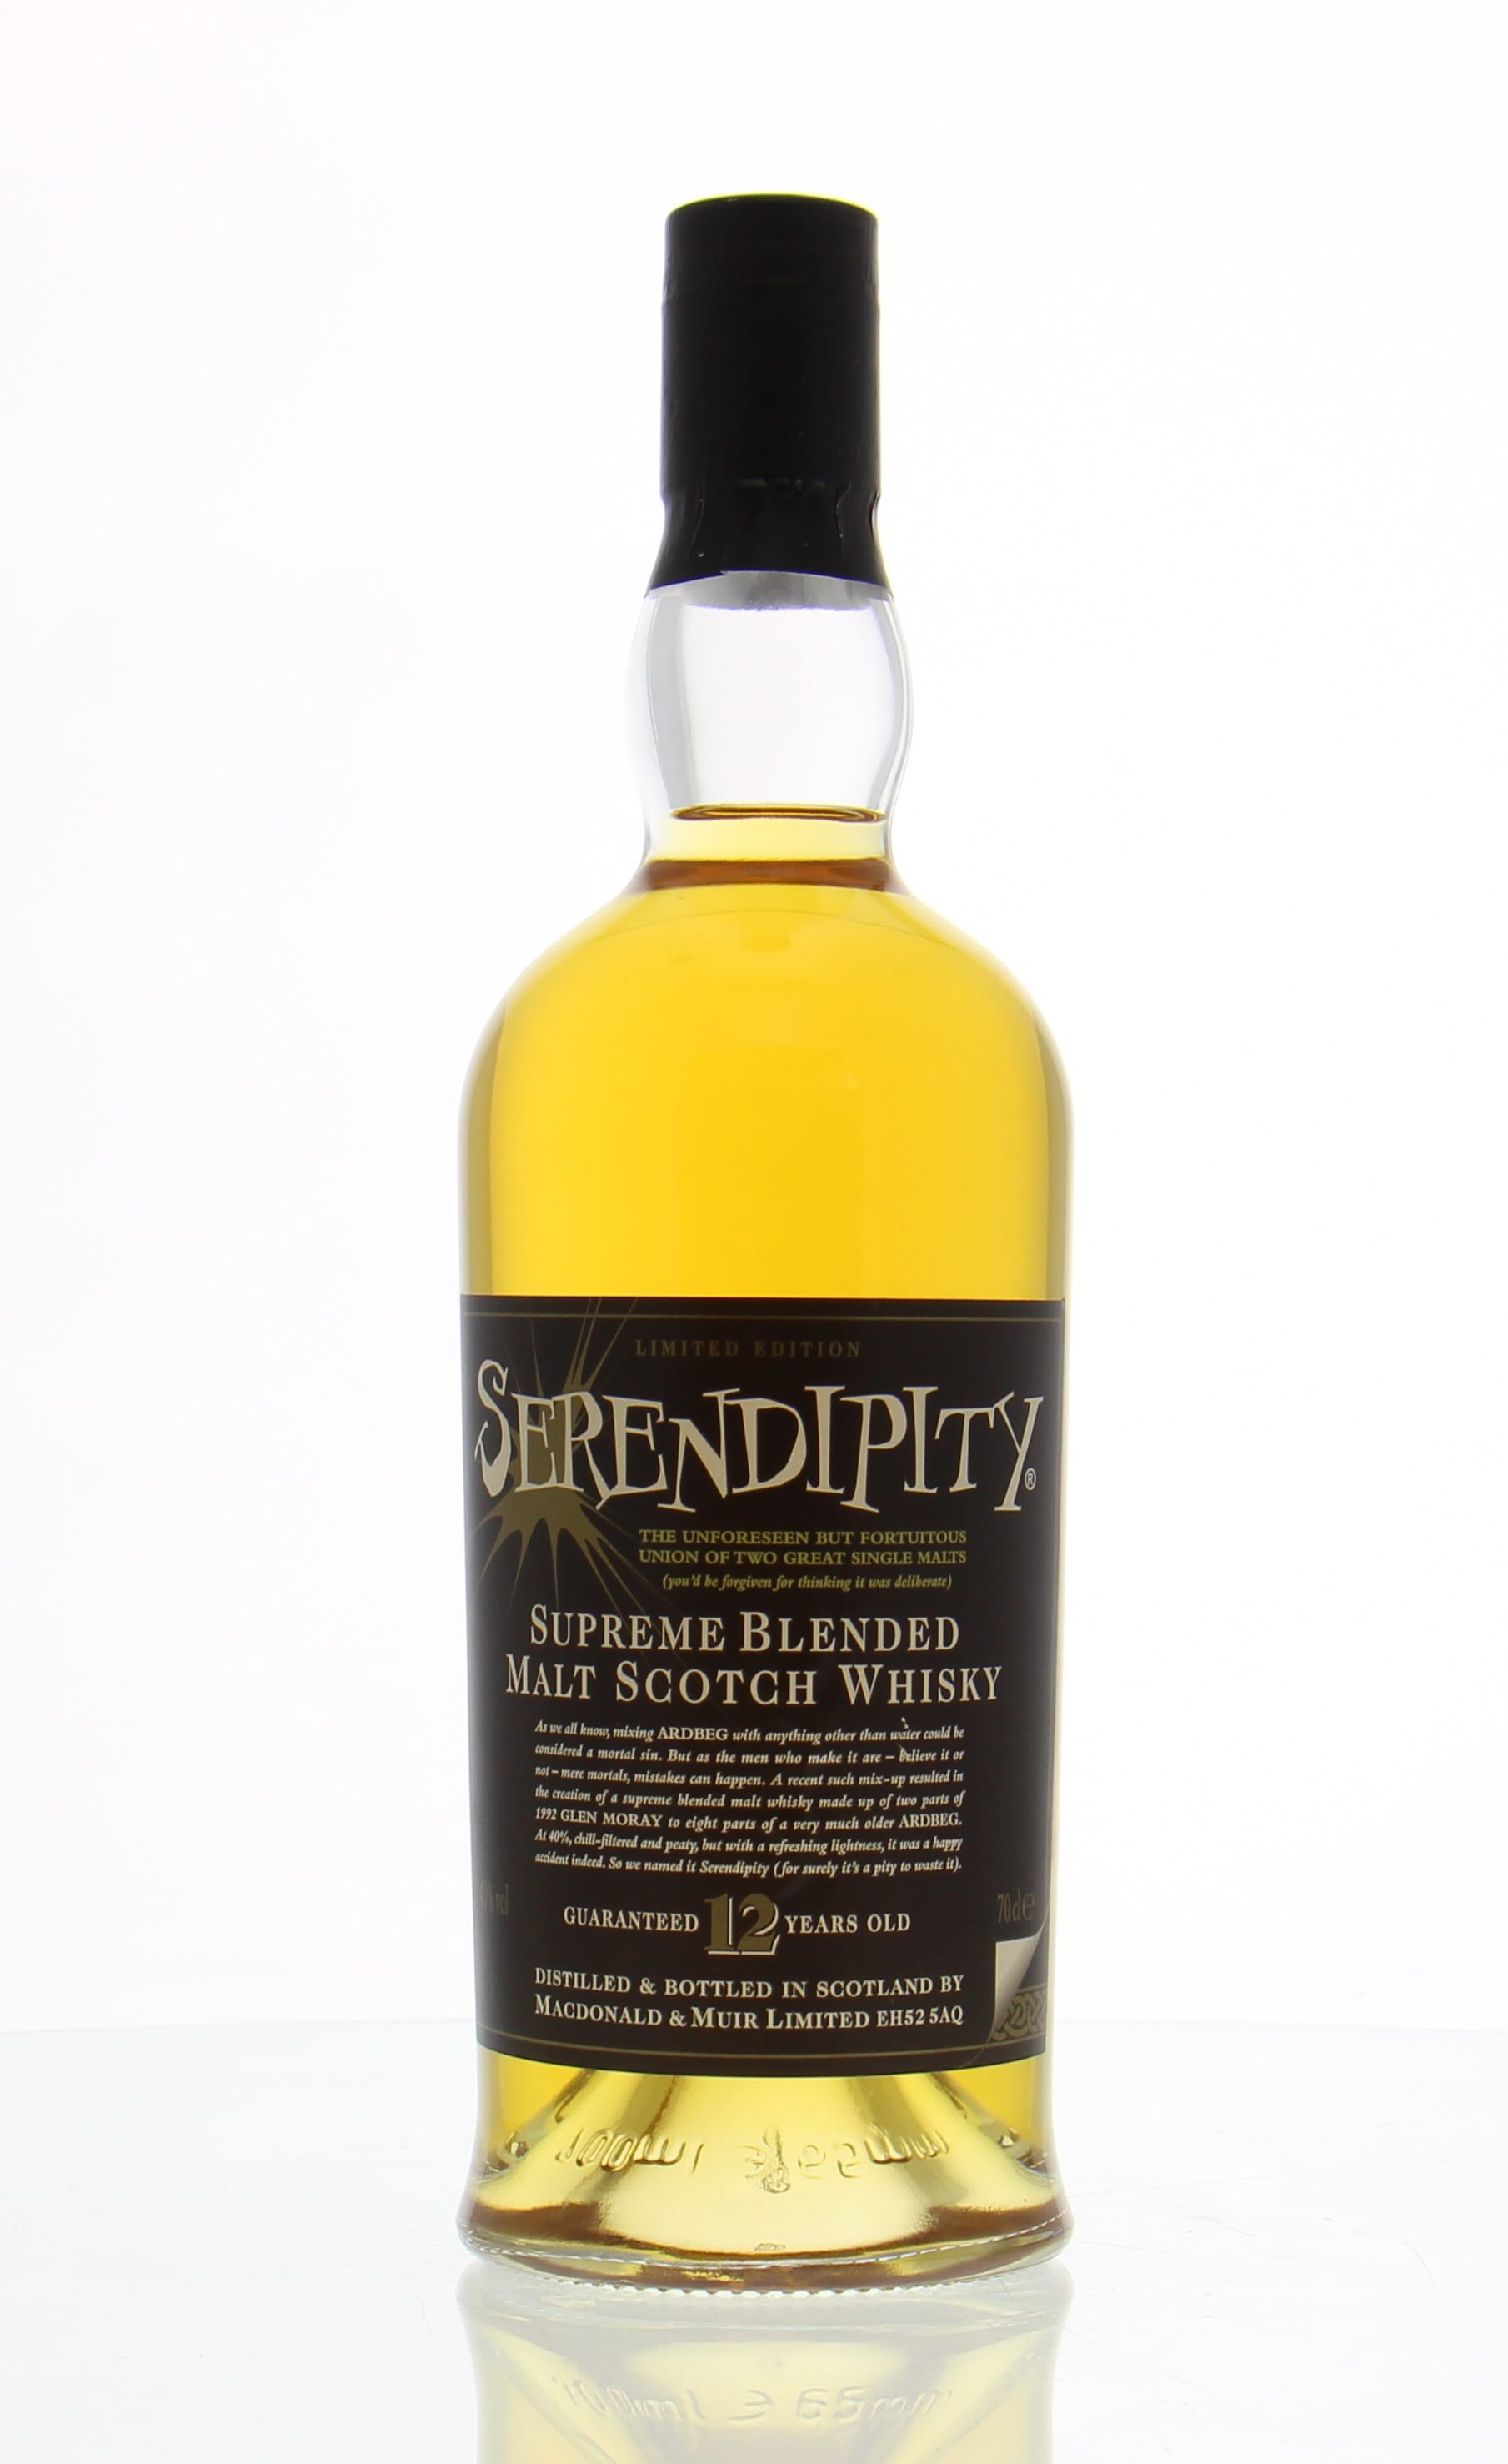 Ardbeg - Serendipity 12 Years Old 40% NV Perfect